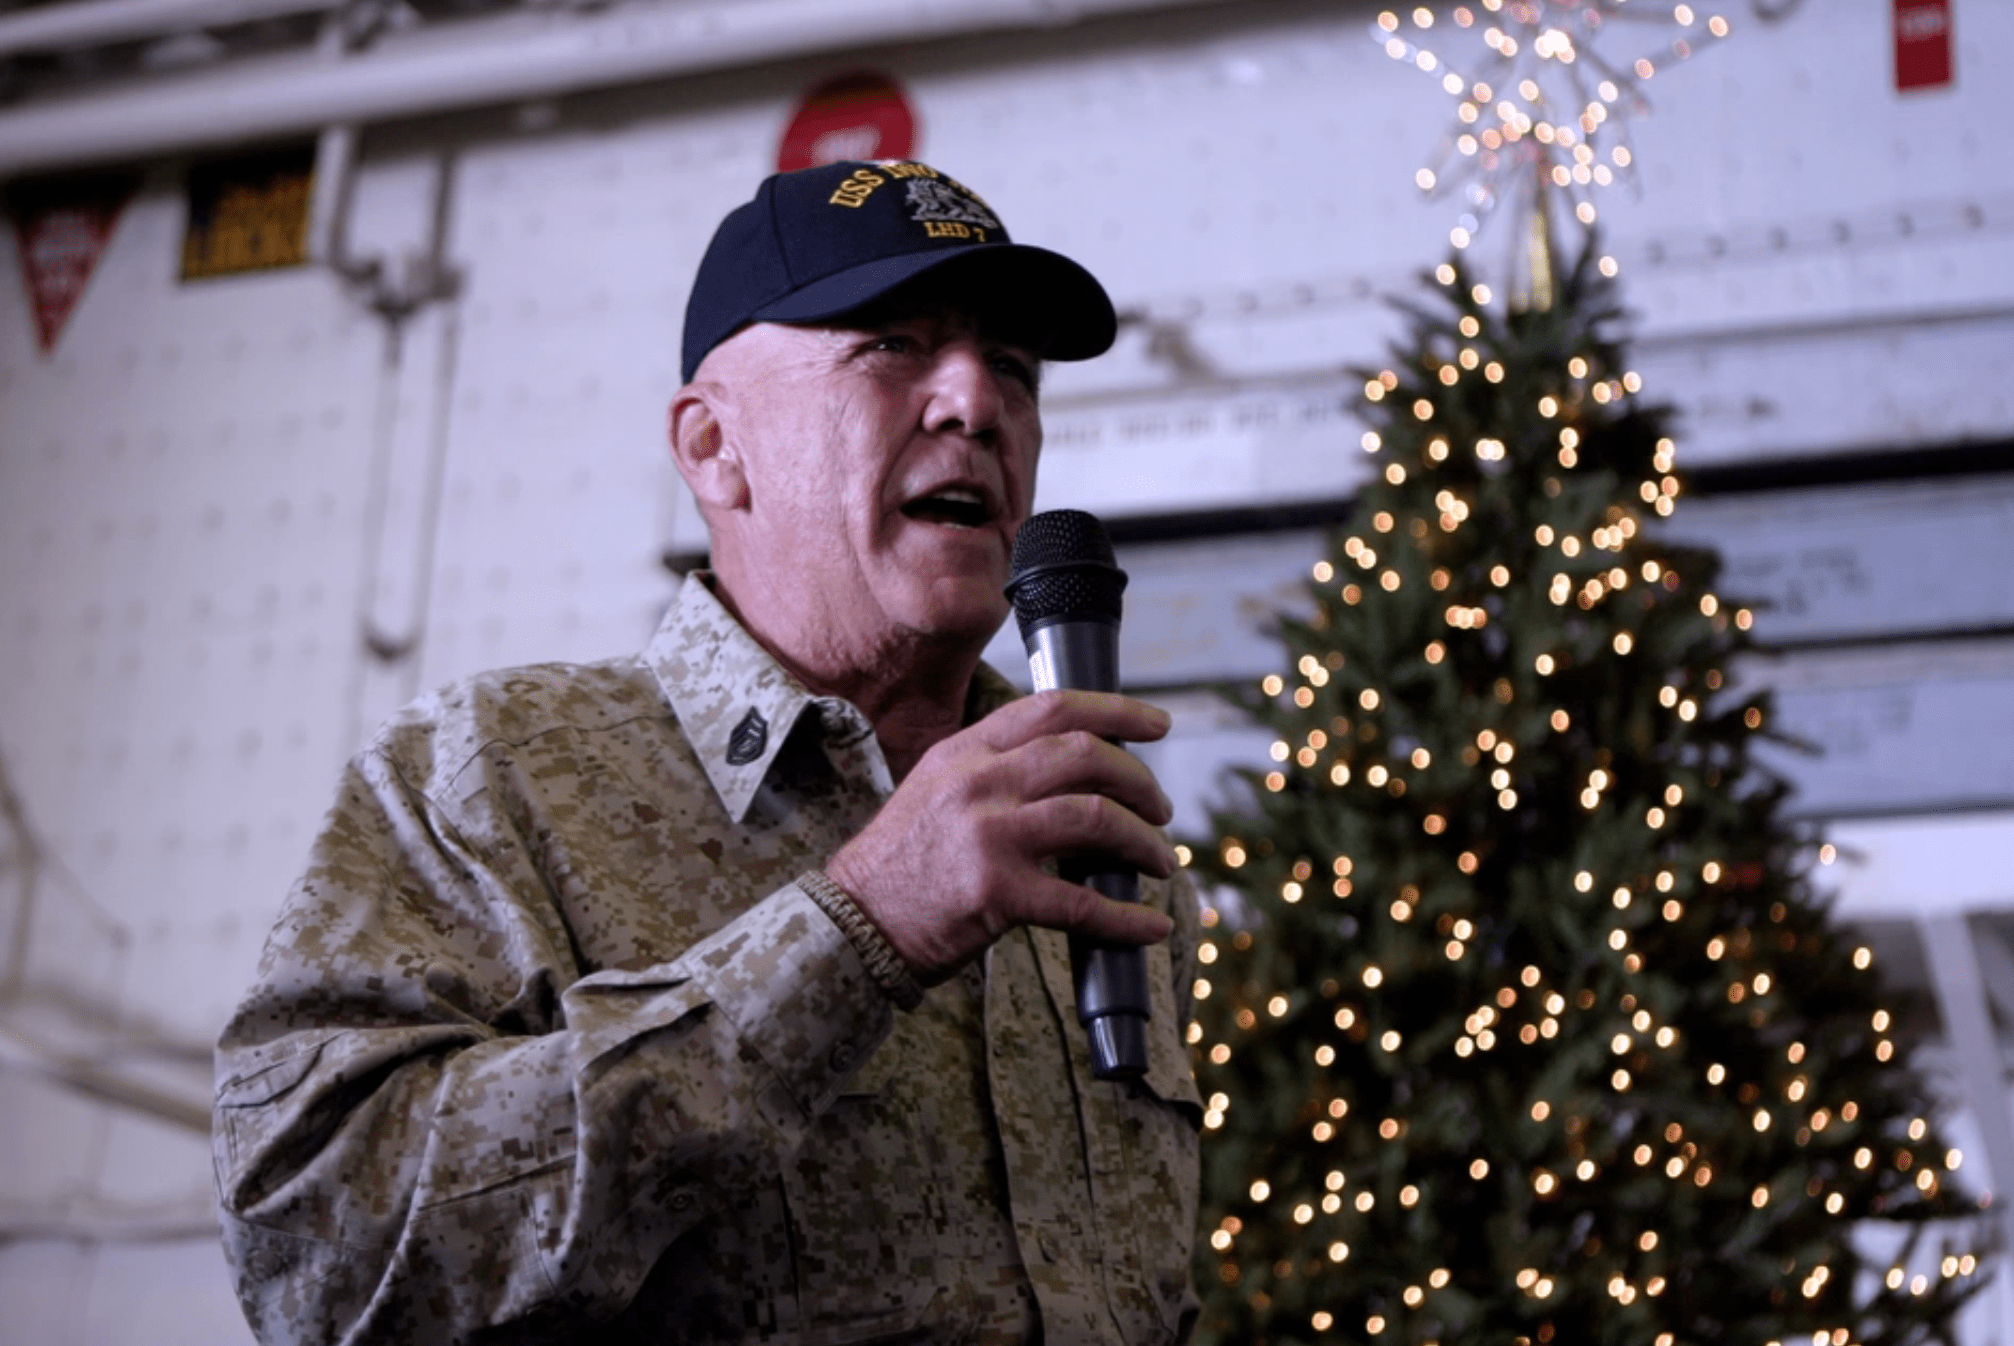 Actor and Marine Corps icon Gunnery Sgt. R. Lee Ermey speaks to Sailors and Marines aboard the amphibious assault ship USS Iwo Jima in the Persian Gulf. Ermey visited Iwo Jima as a Moral, Welfare and Recreation event for deployed troops during the holiday season, 2008. Photo: DVIDS